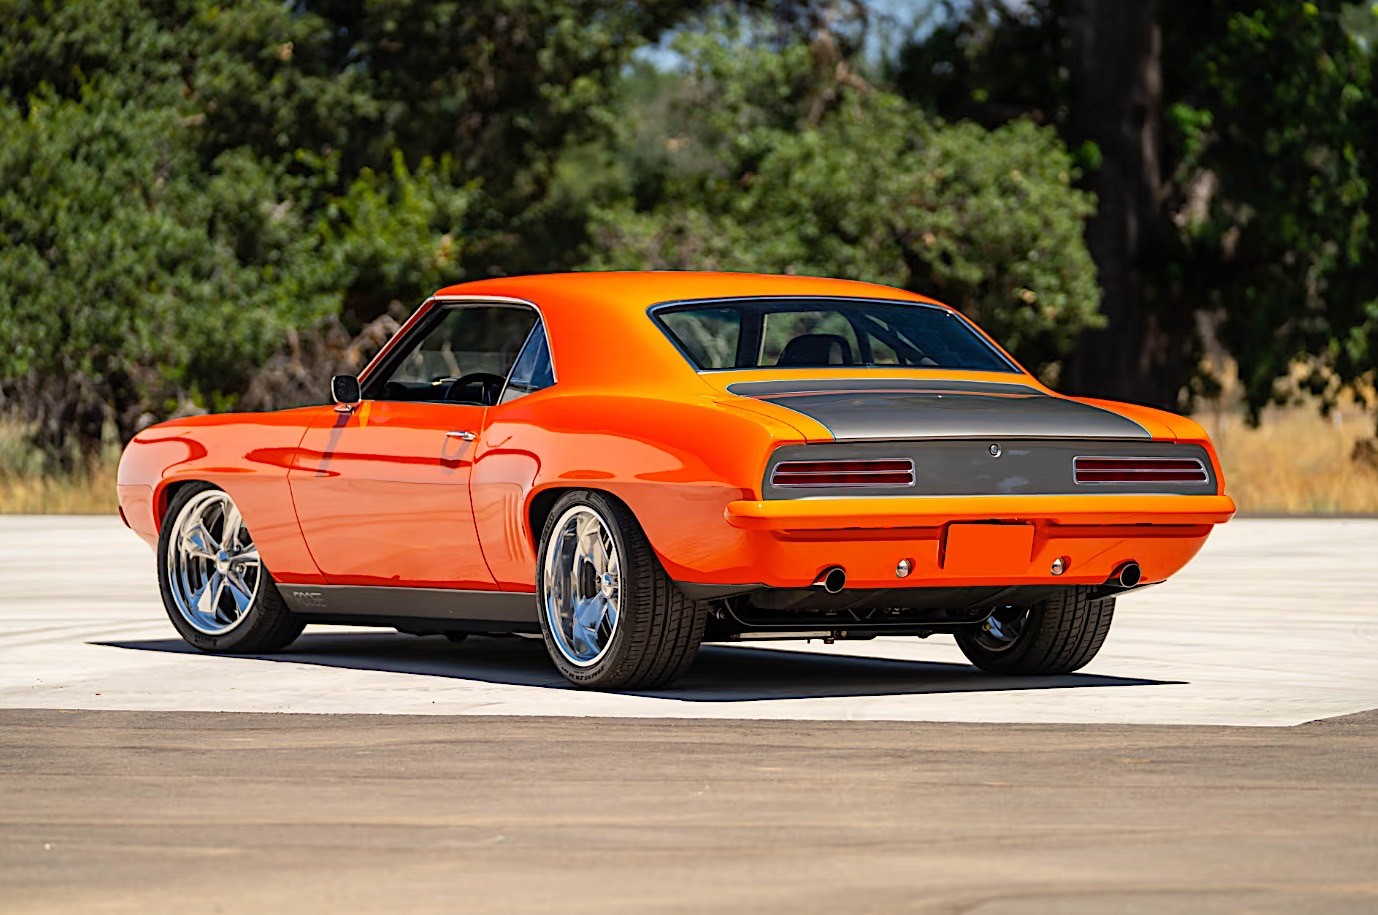 Chip Foose on X: #tbt Our '69 #Camaro #restomod featured trimmed